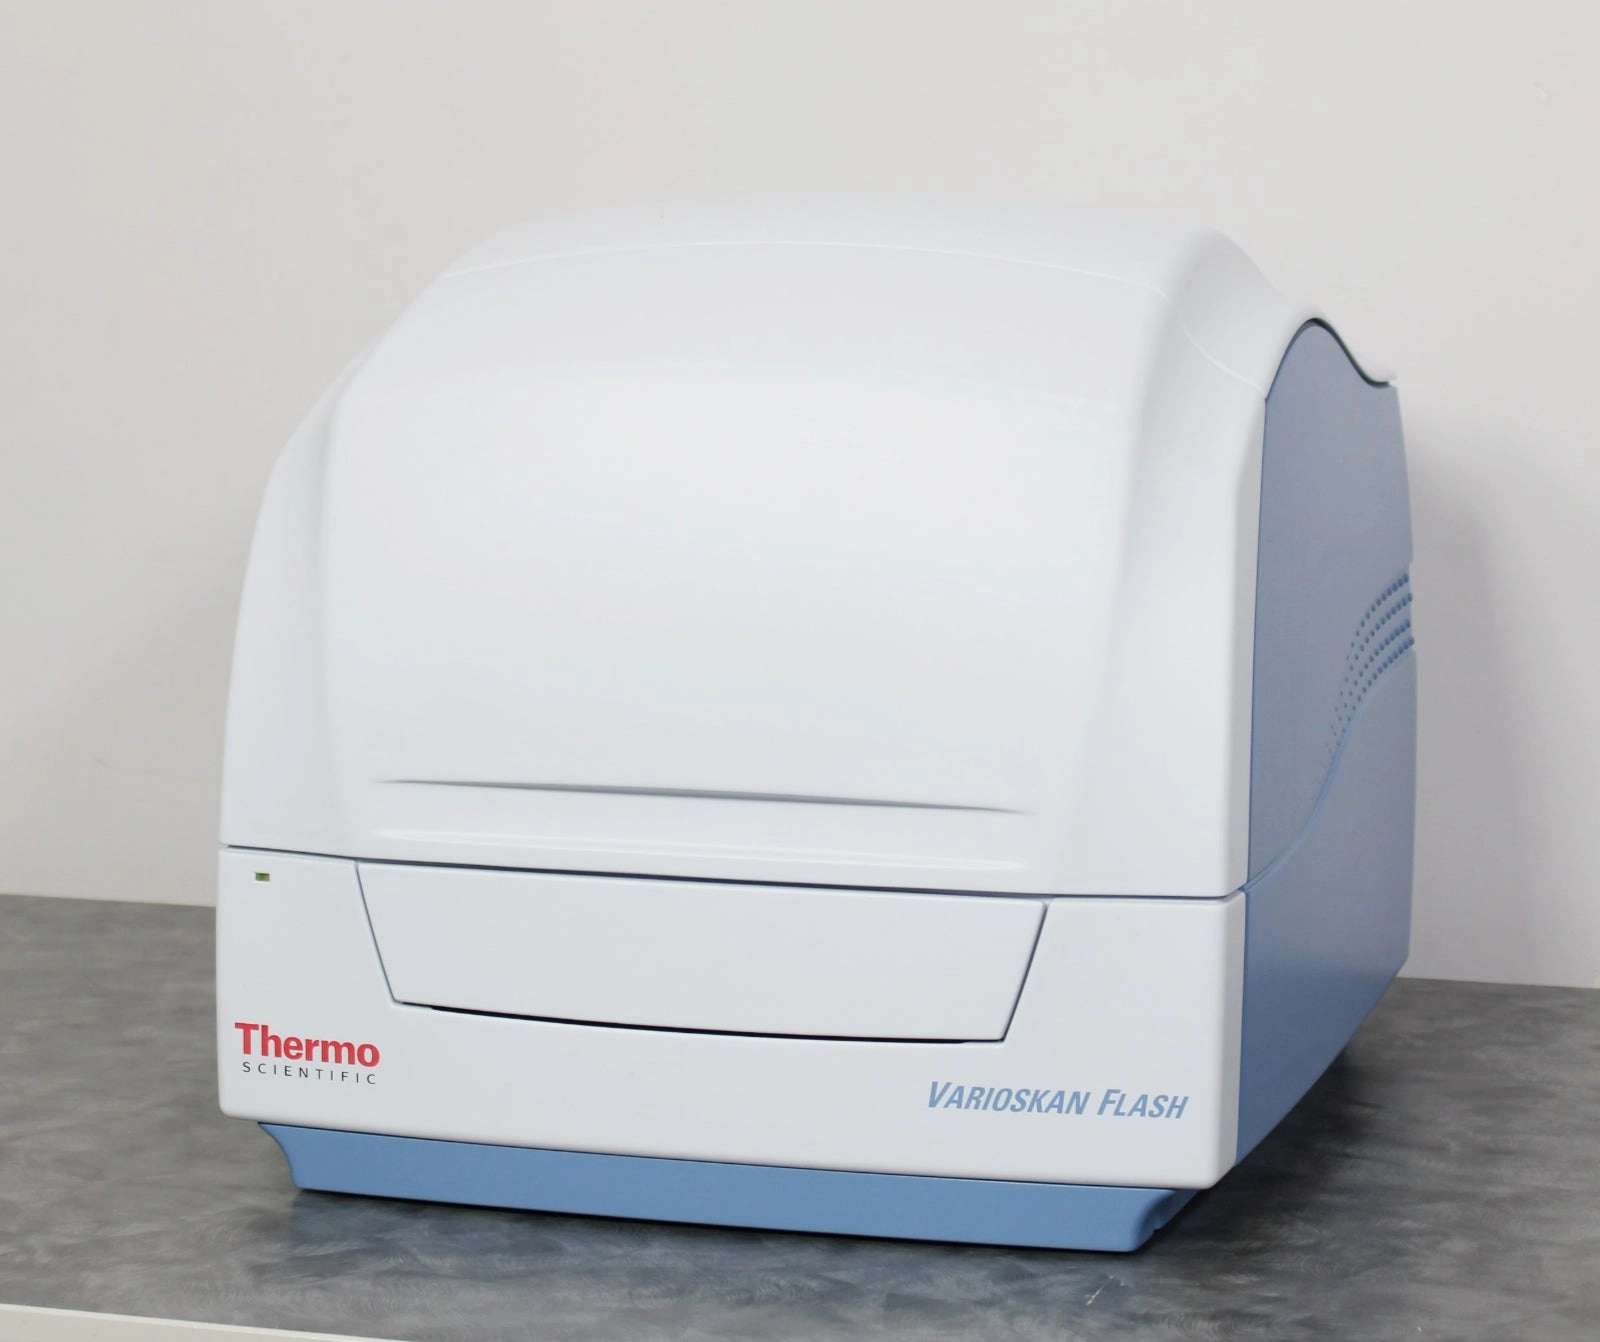 Thermo Scientific Varioskan Flash Multimode Microplate Reader with Warranty